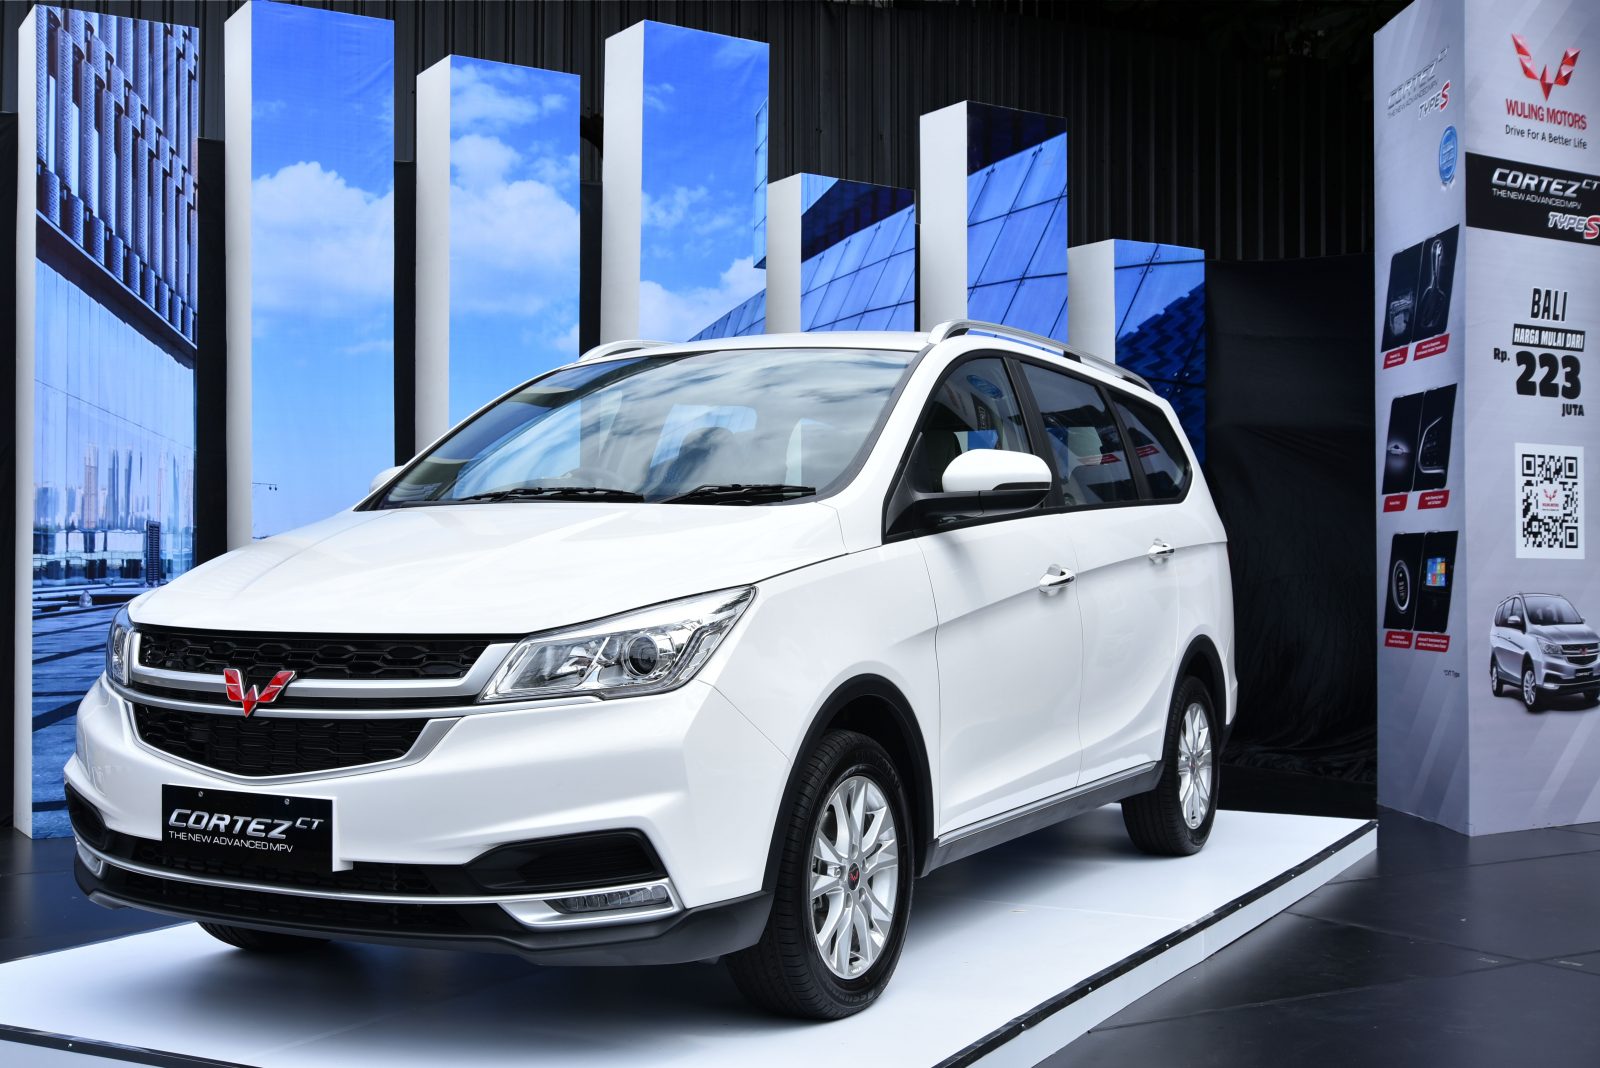 Image Wuling Presents Cortez CT Type S in The Island of Gods